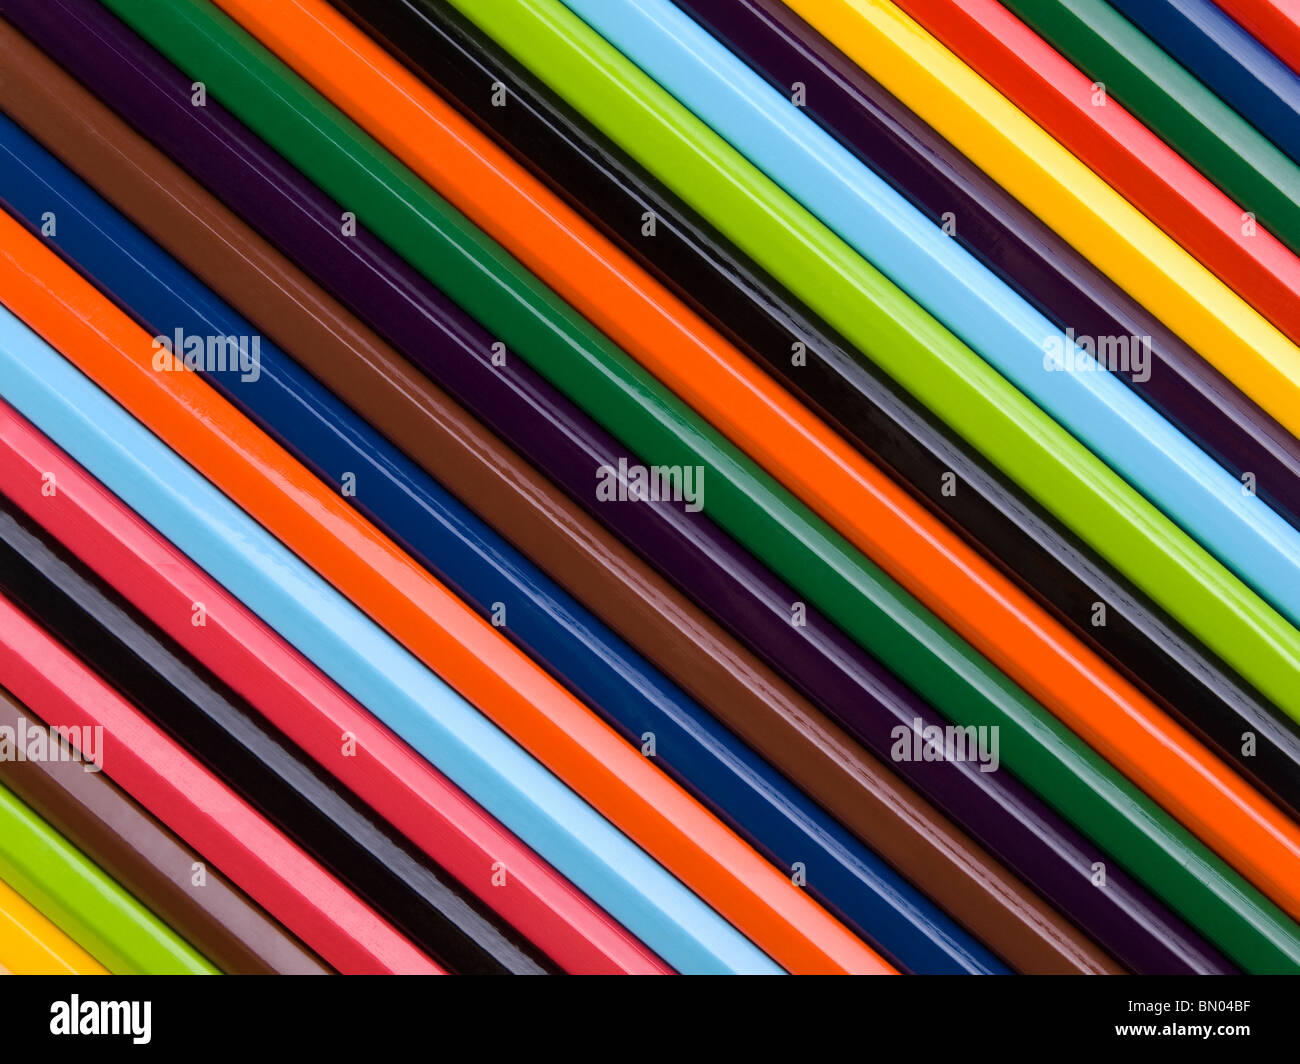 Top view of assorted color pencils disposed one next to the other. Stock Photo